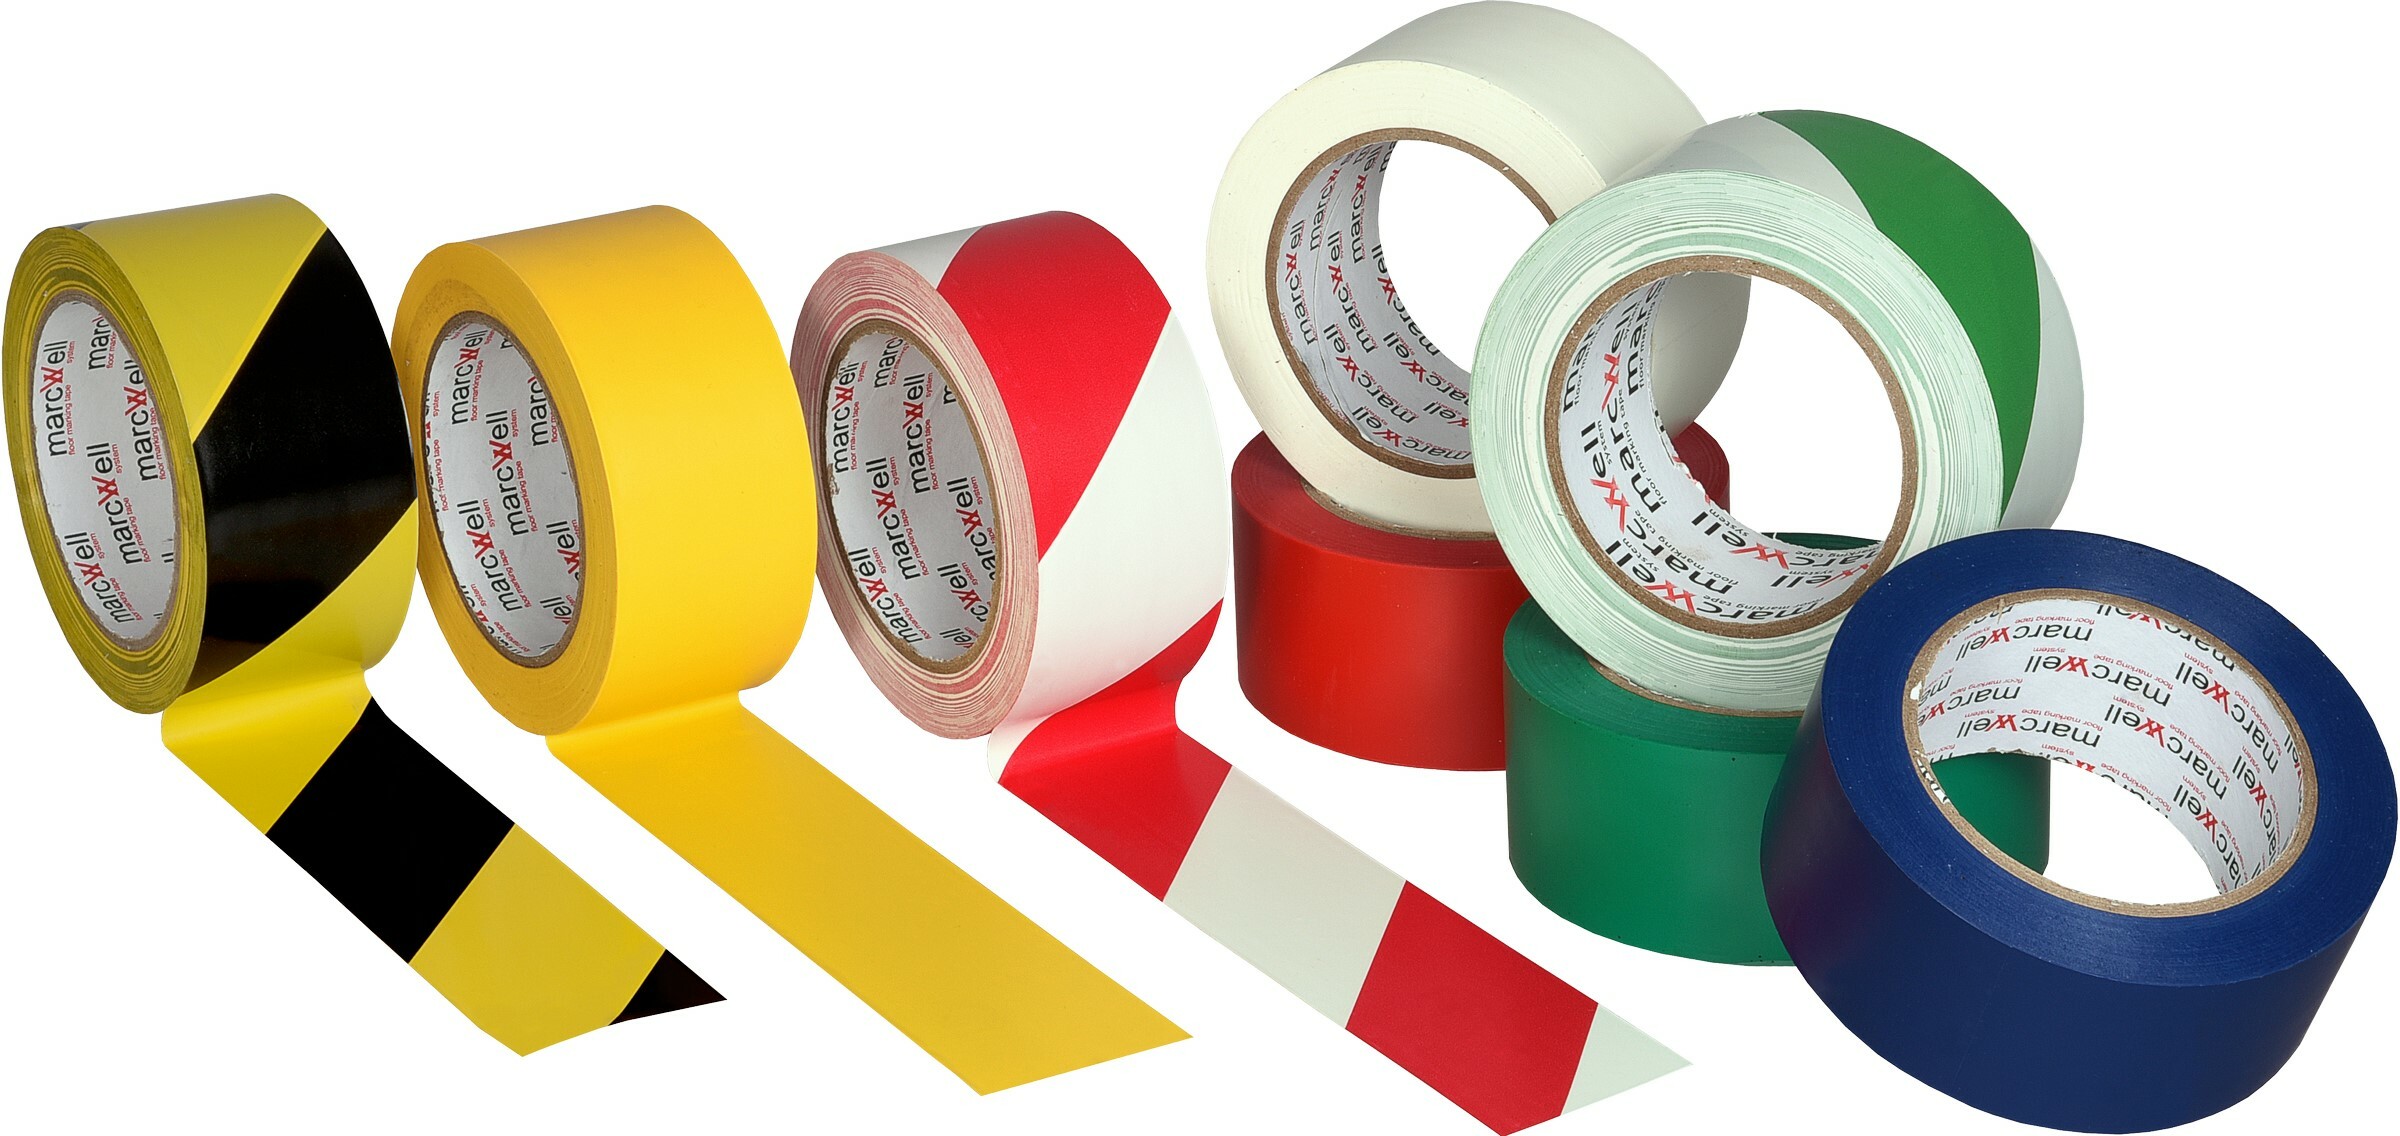 9218-03056 - Ground marking tapes overview